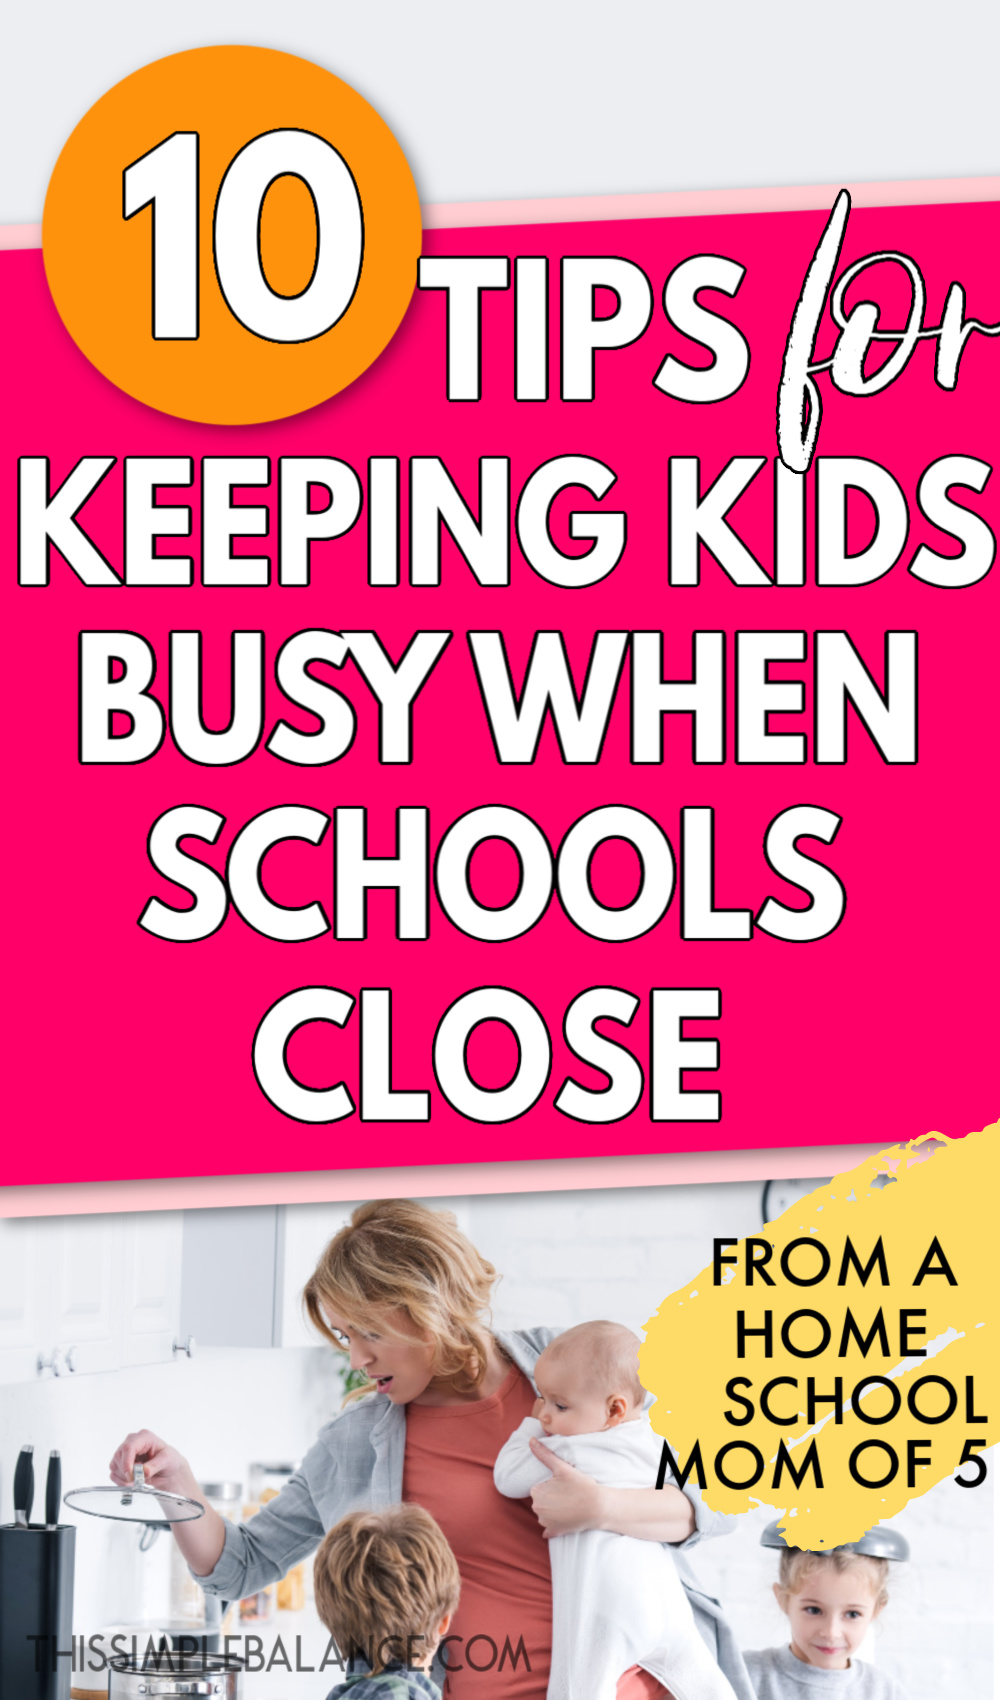 mom holding baby and lifting pod lid to check on dinner, with text overlay, "10 tips for keeping kids busy when schools close - from a homeschool mom of 5"